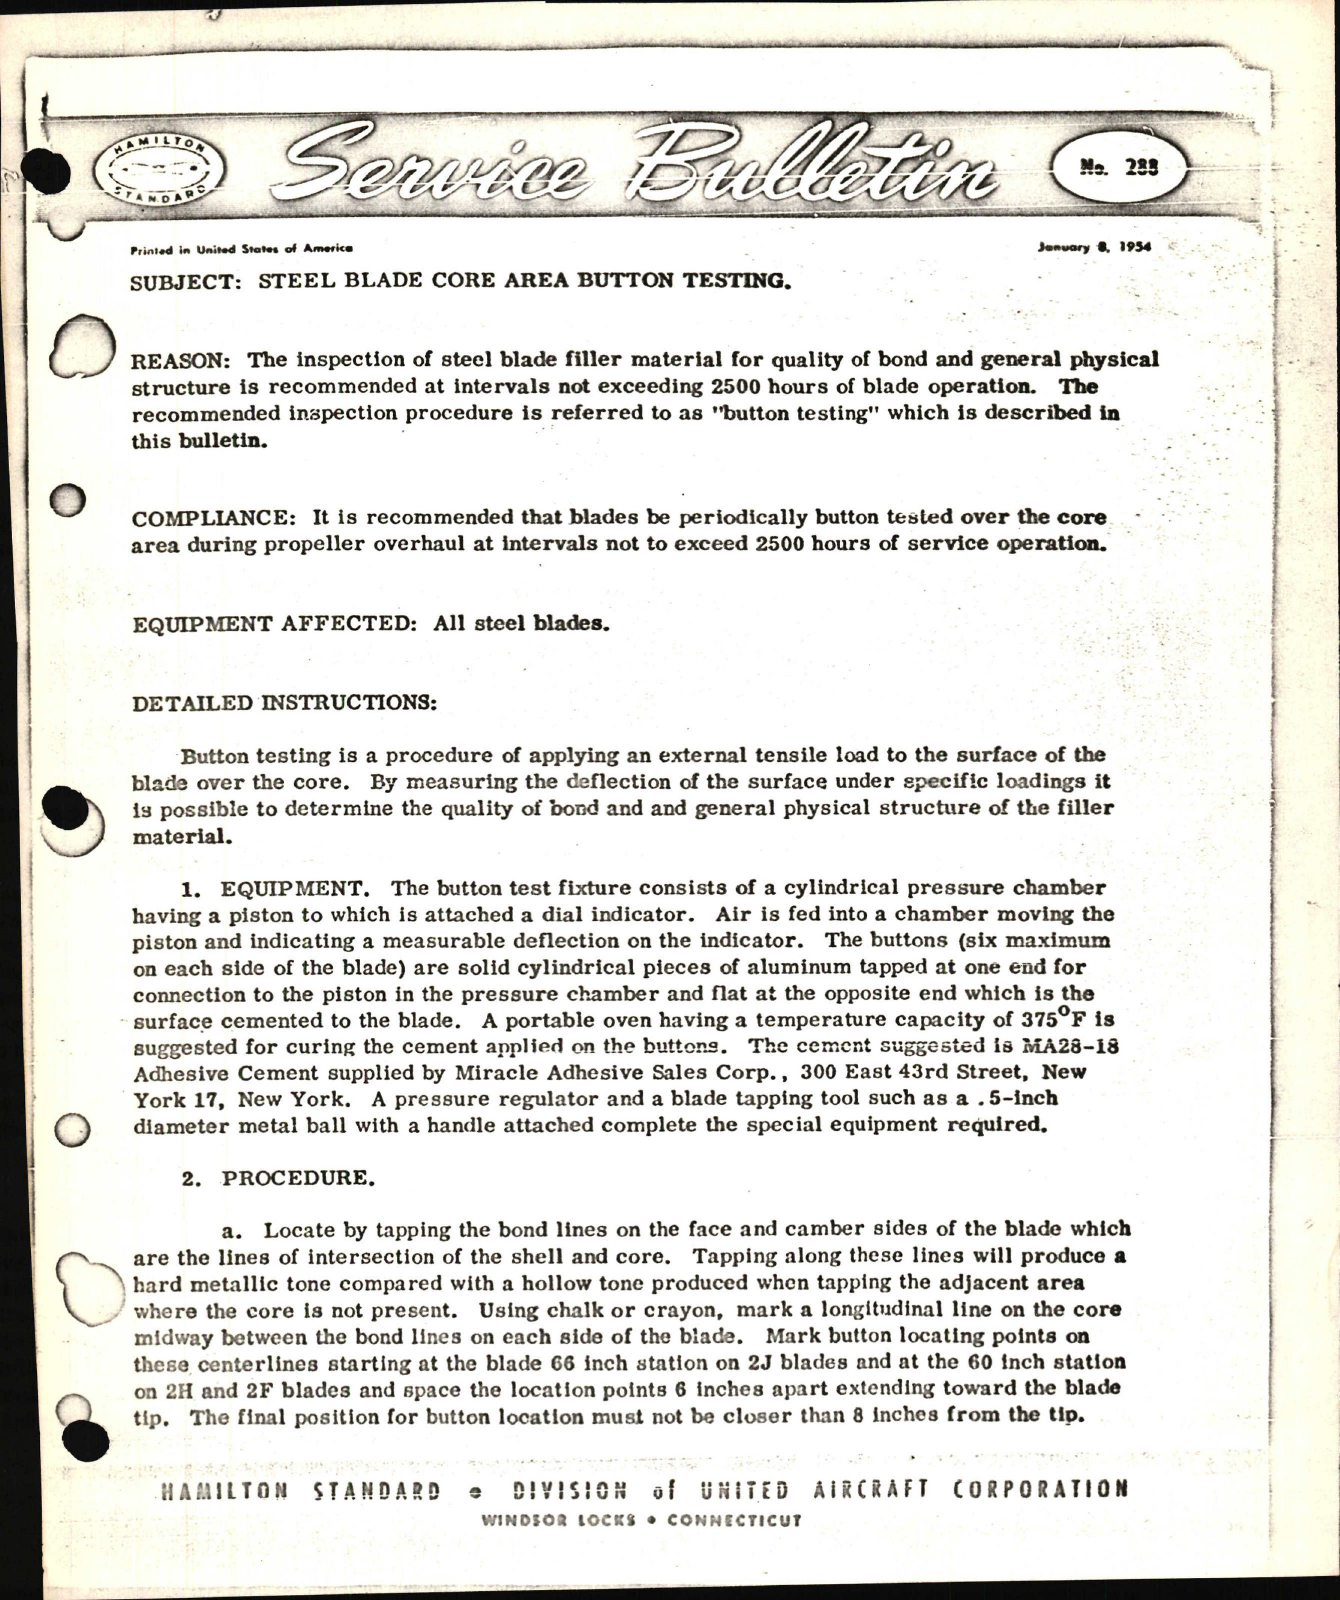 Sample page 1 from AirCorps Library document: Steel Blade Core Area Button Testing